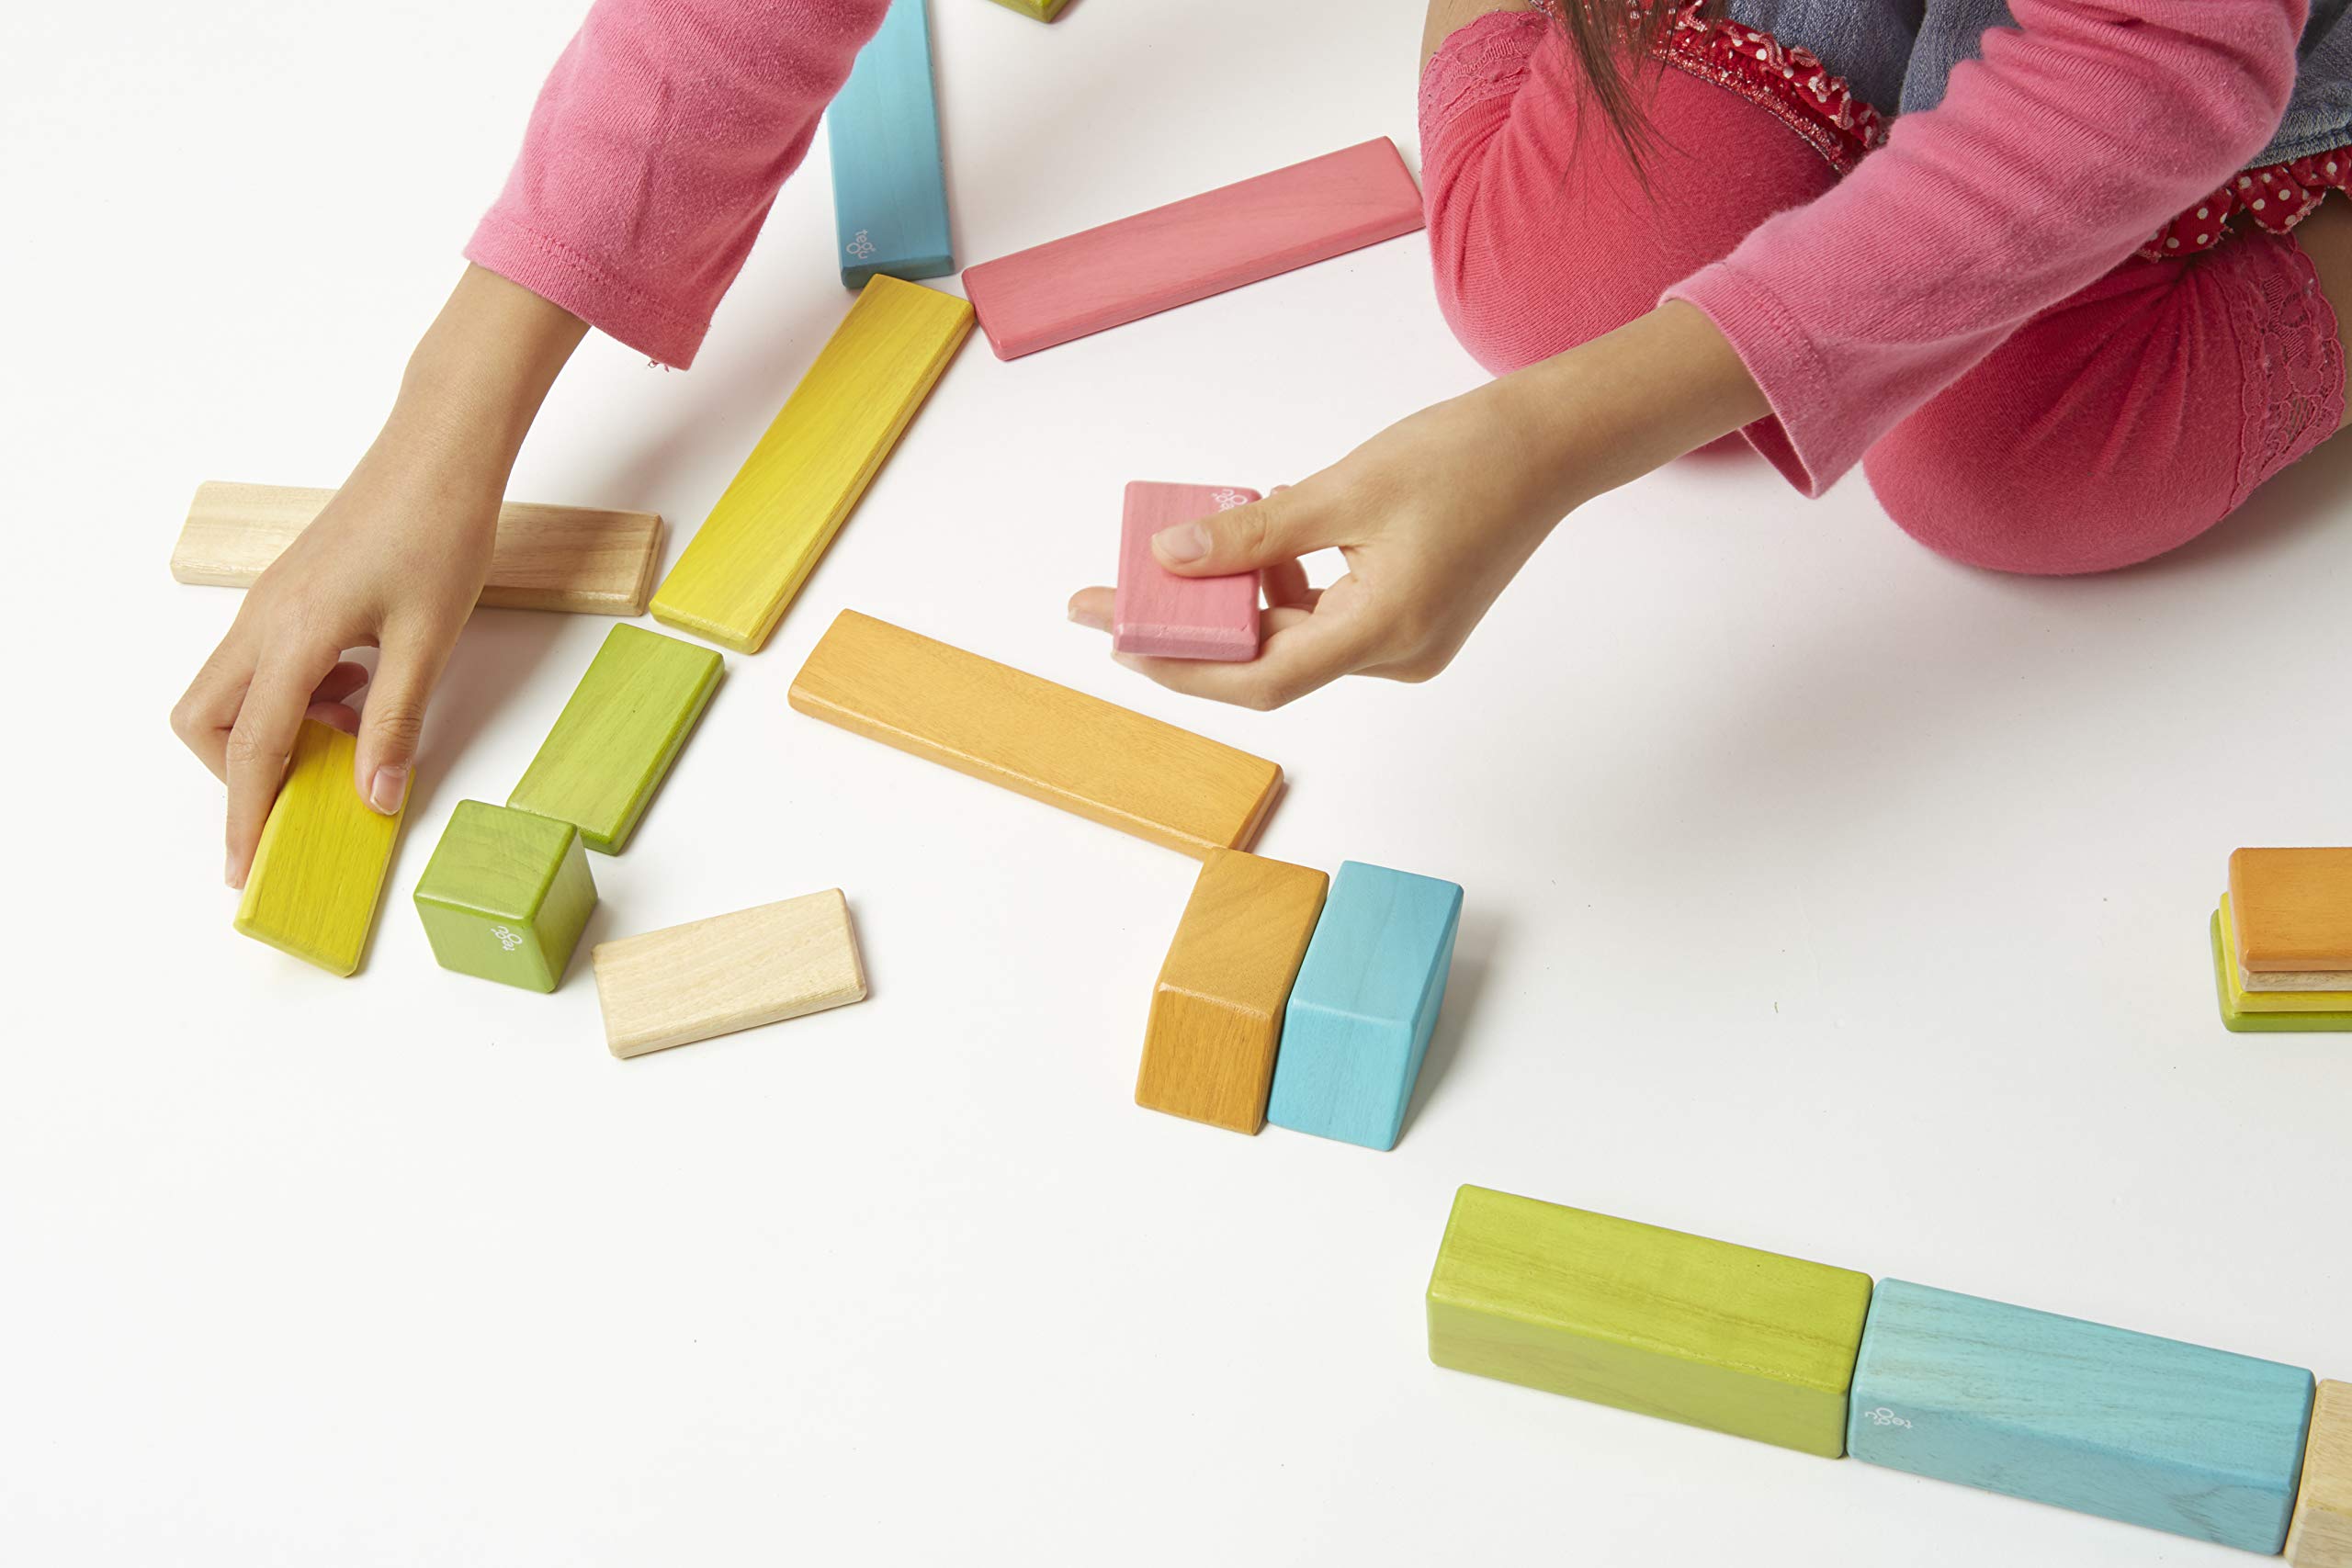 42 Piece Tegu Magnetic Wooden Block Set, Tints, 1-99 years old